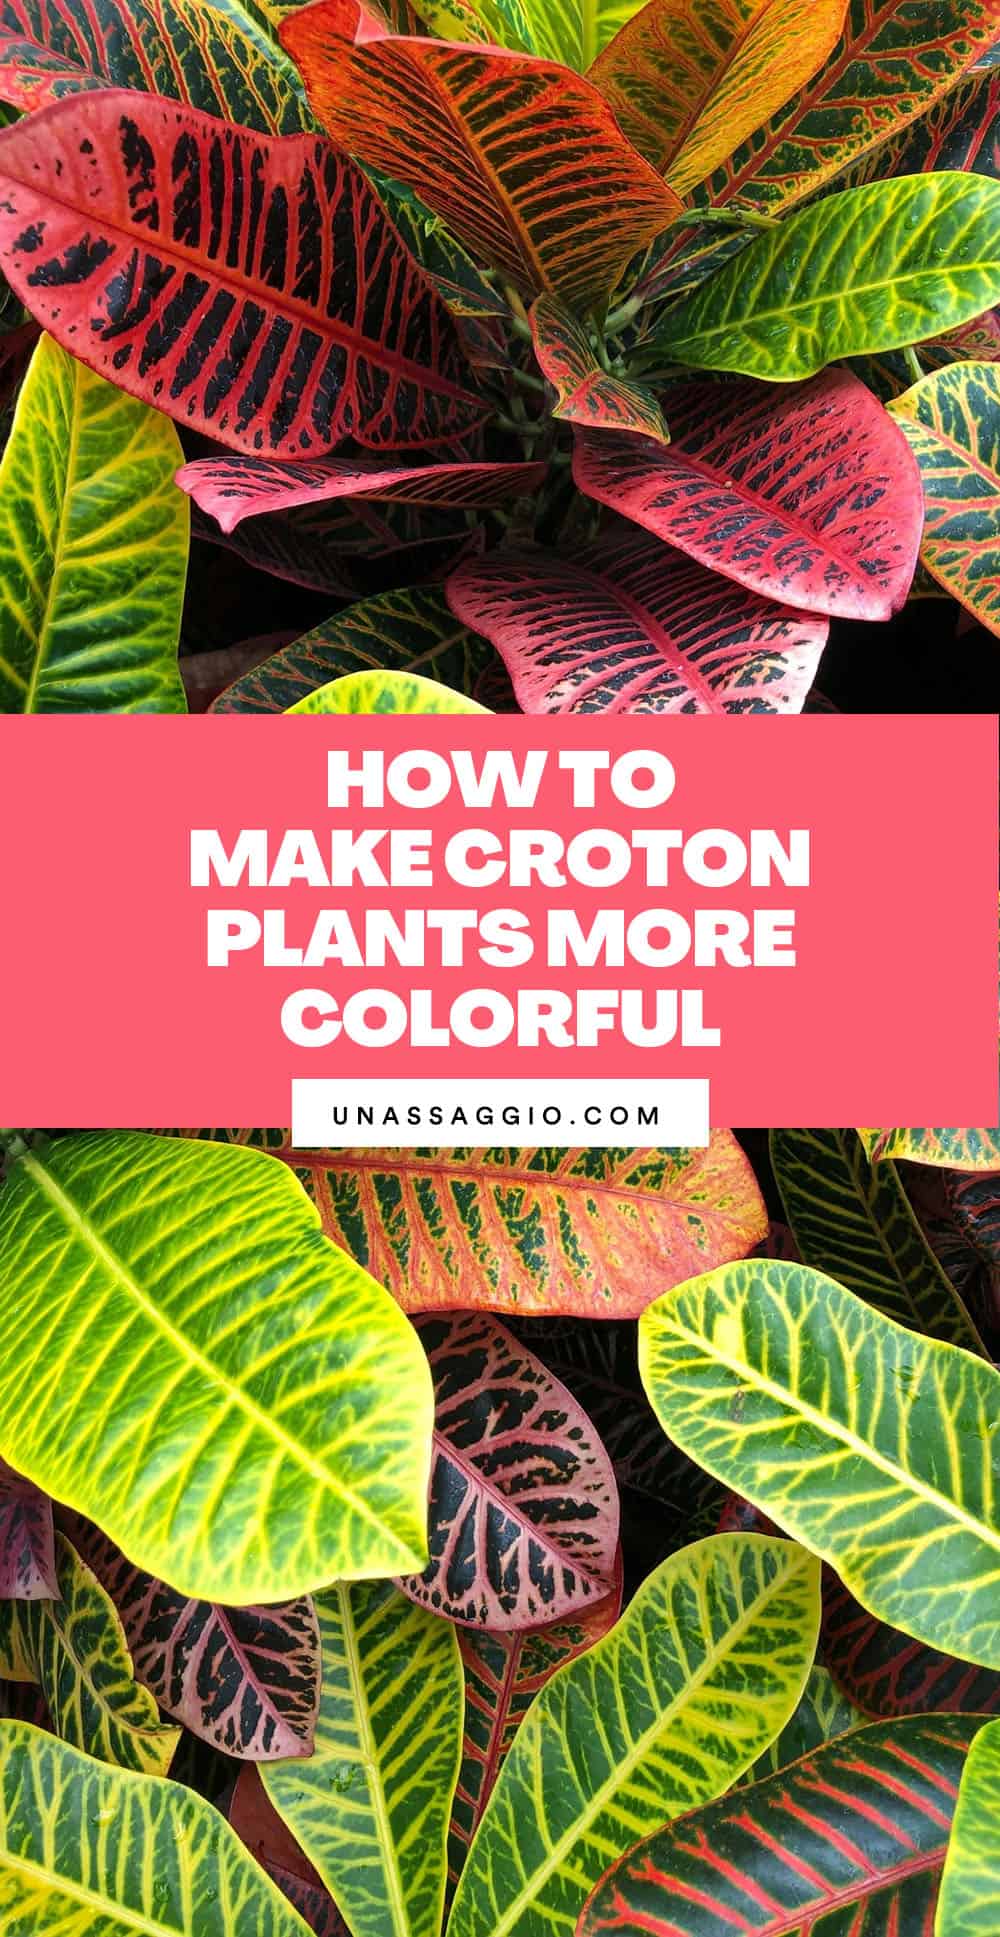 How to Make Croton Plants More Colorful